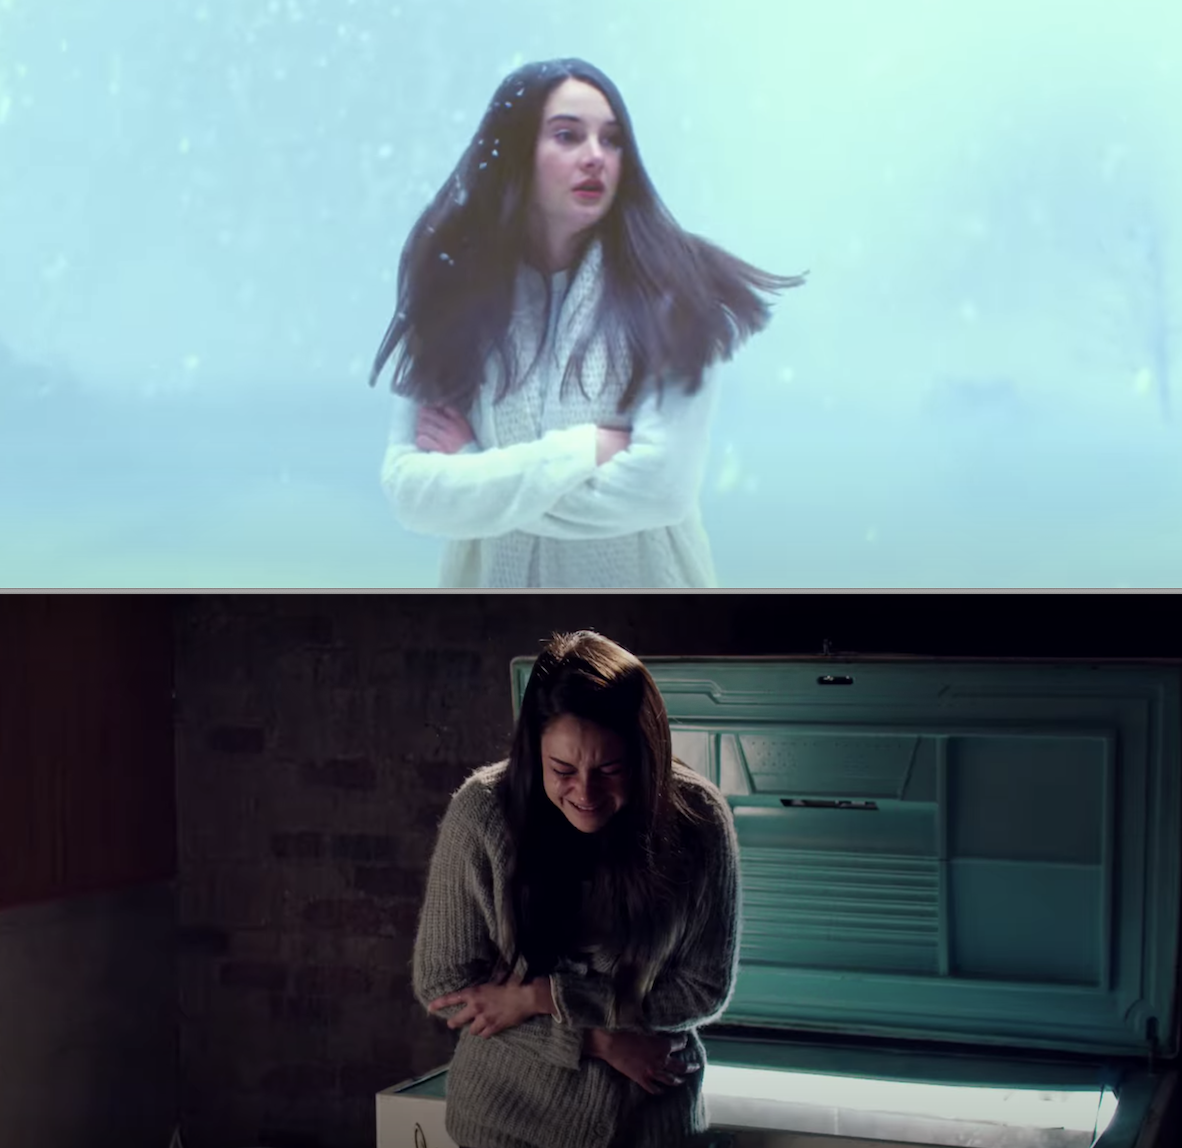 Shailene Woodley standing in a blizzard, then her crying next to a fridge